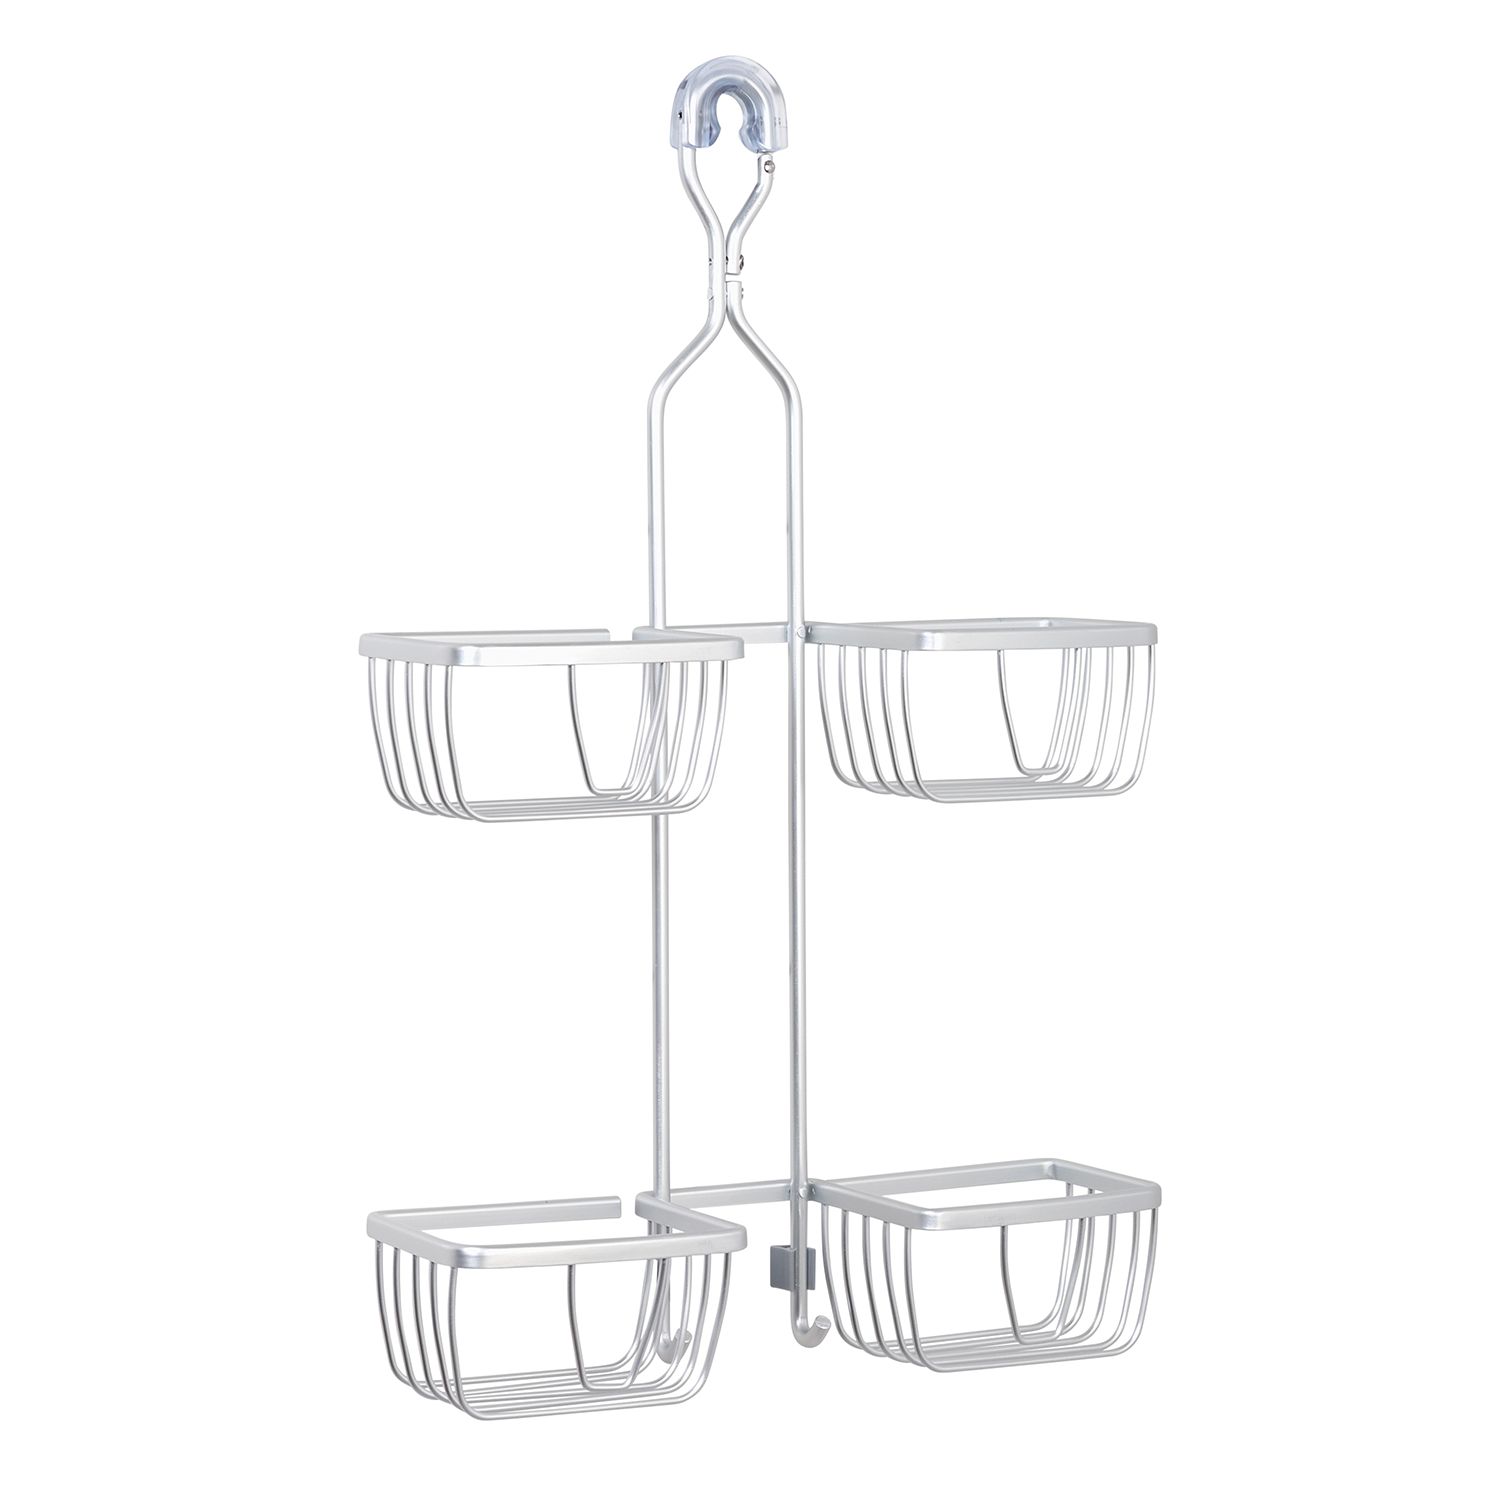 Zenna Home Premium Expandable Shower Caddy for Hand Held Shower or